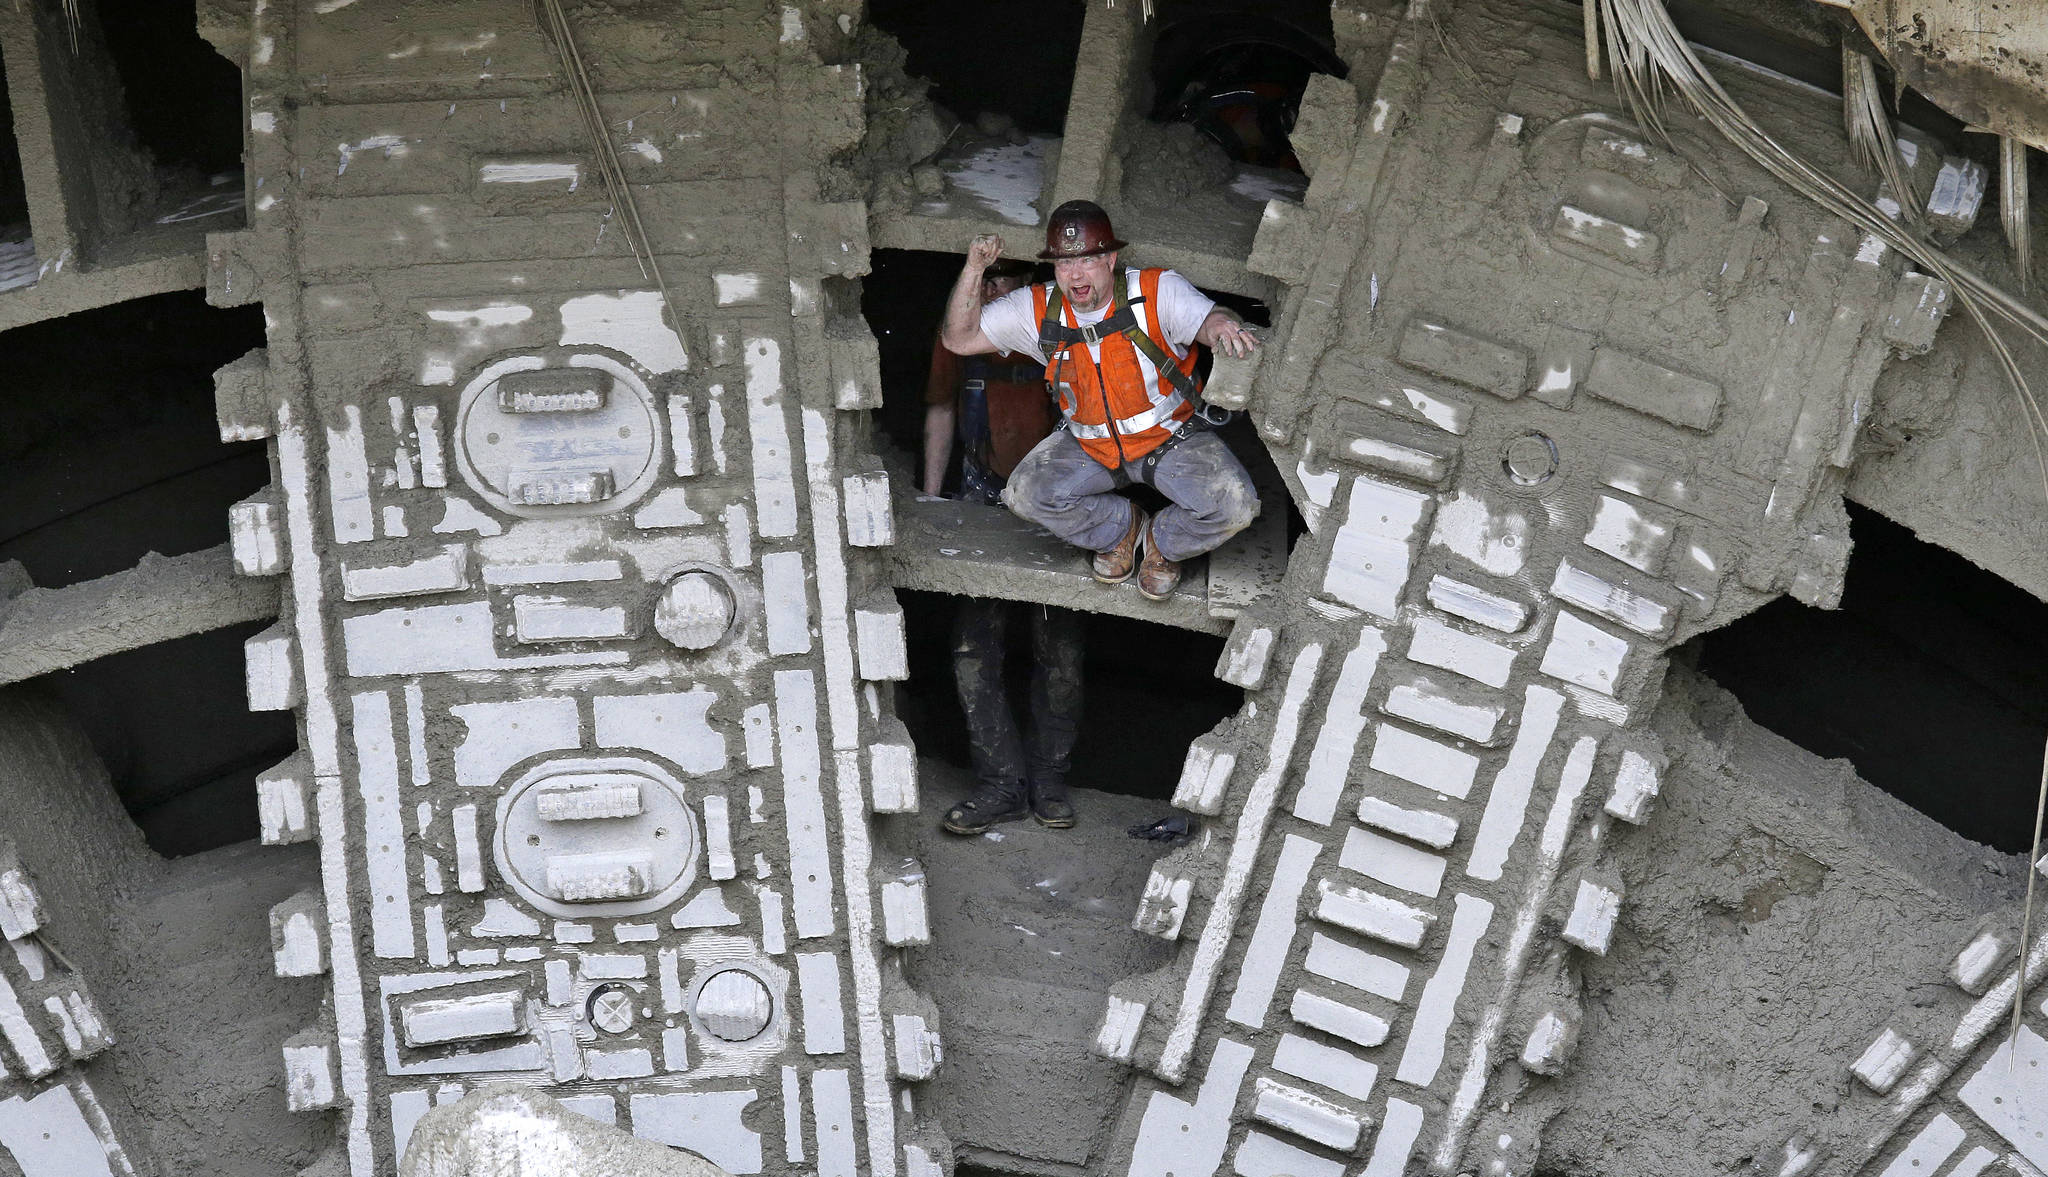 A worker pumps his fists as he stands between the cutting blades of a massive tunneling machine Tuesday under Seattle. (Elaine Thompson/The Associated Press)